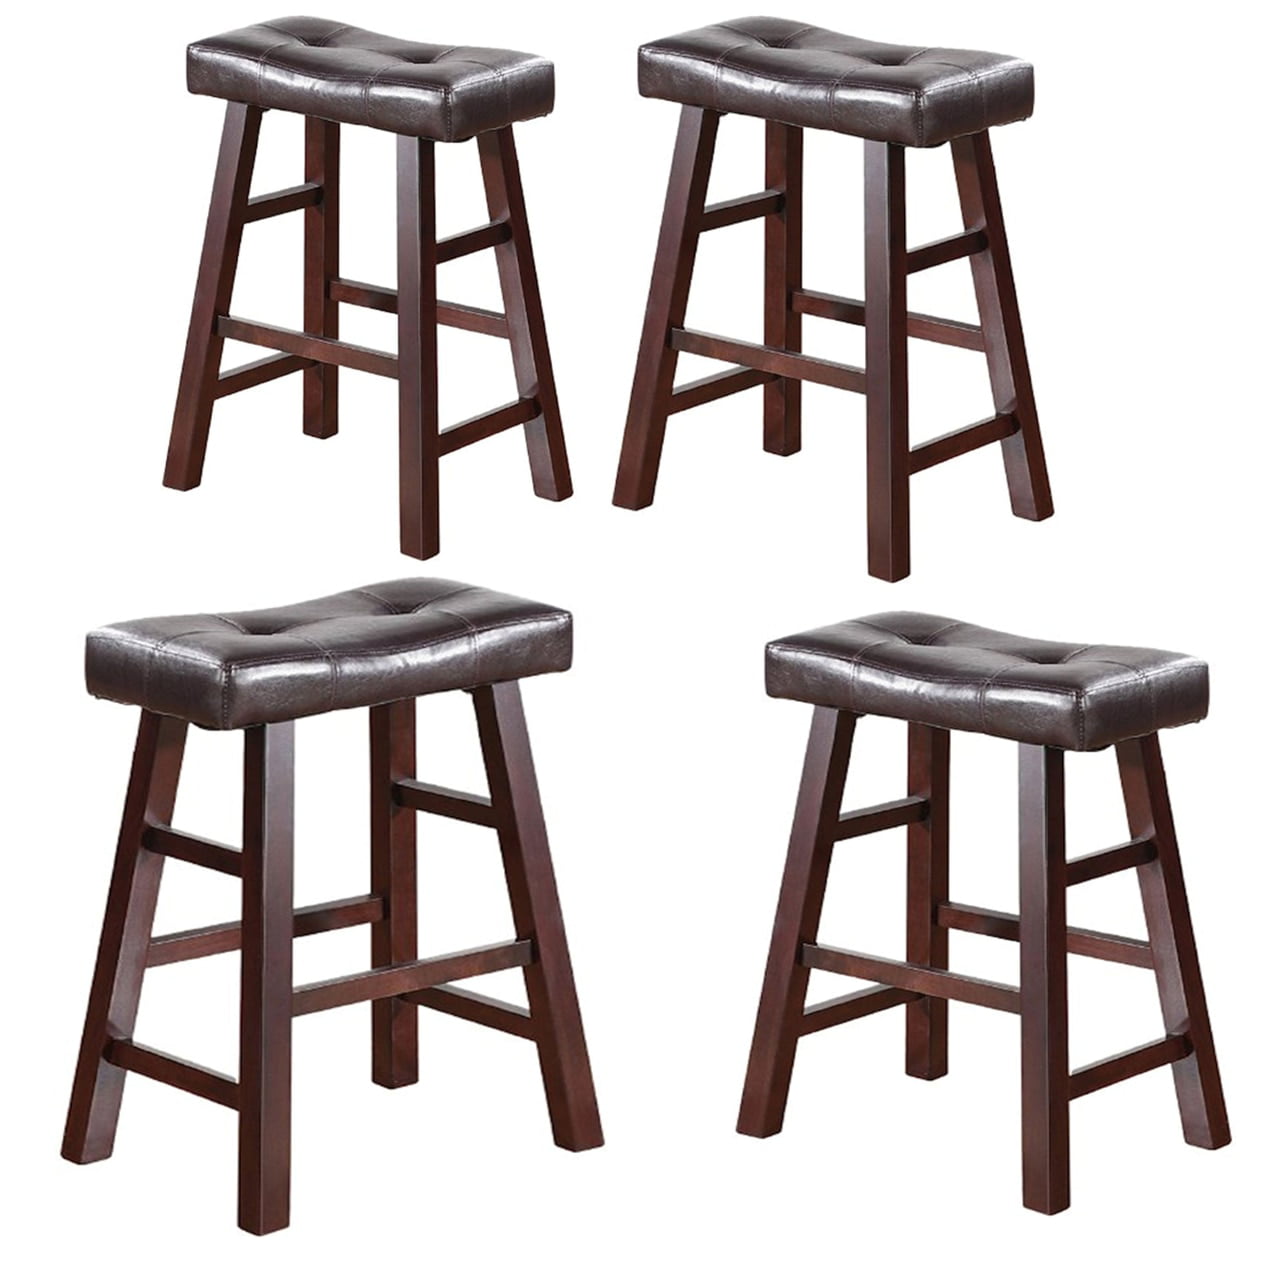 Set of 4 Barstools bar stool kitchen Counter height Wooden Espresso